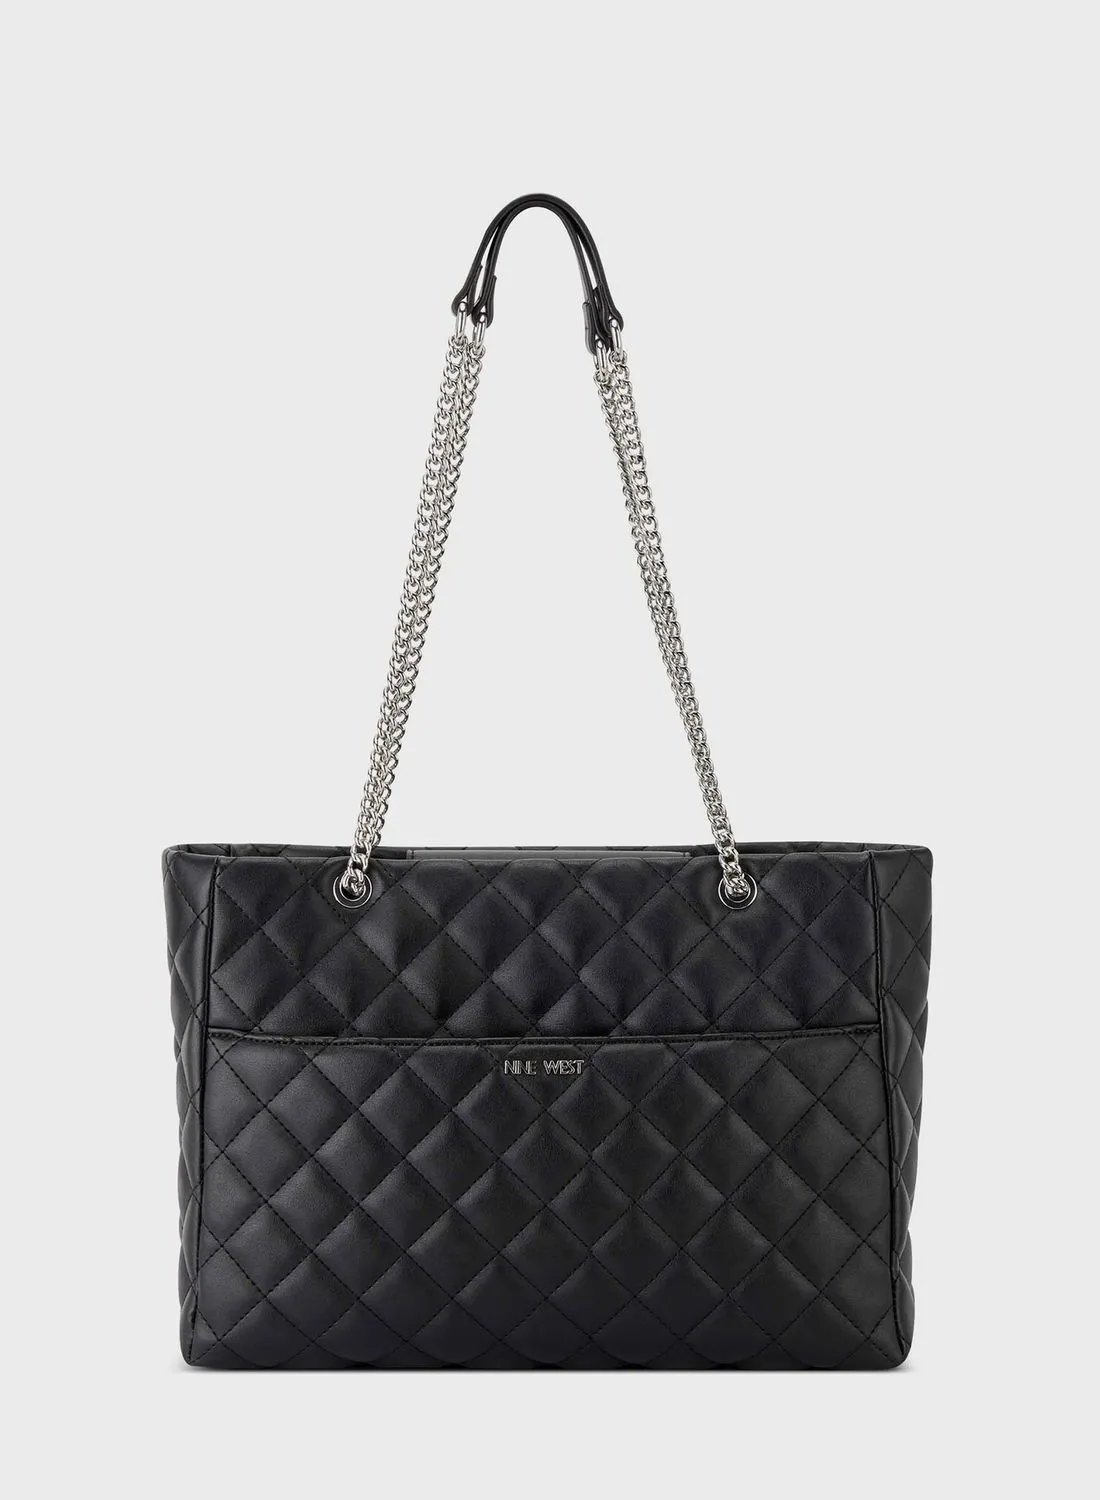 NINE WEST Quilted Top handle Tote